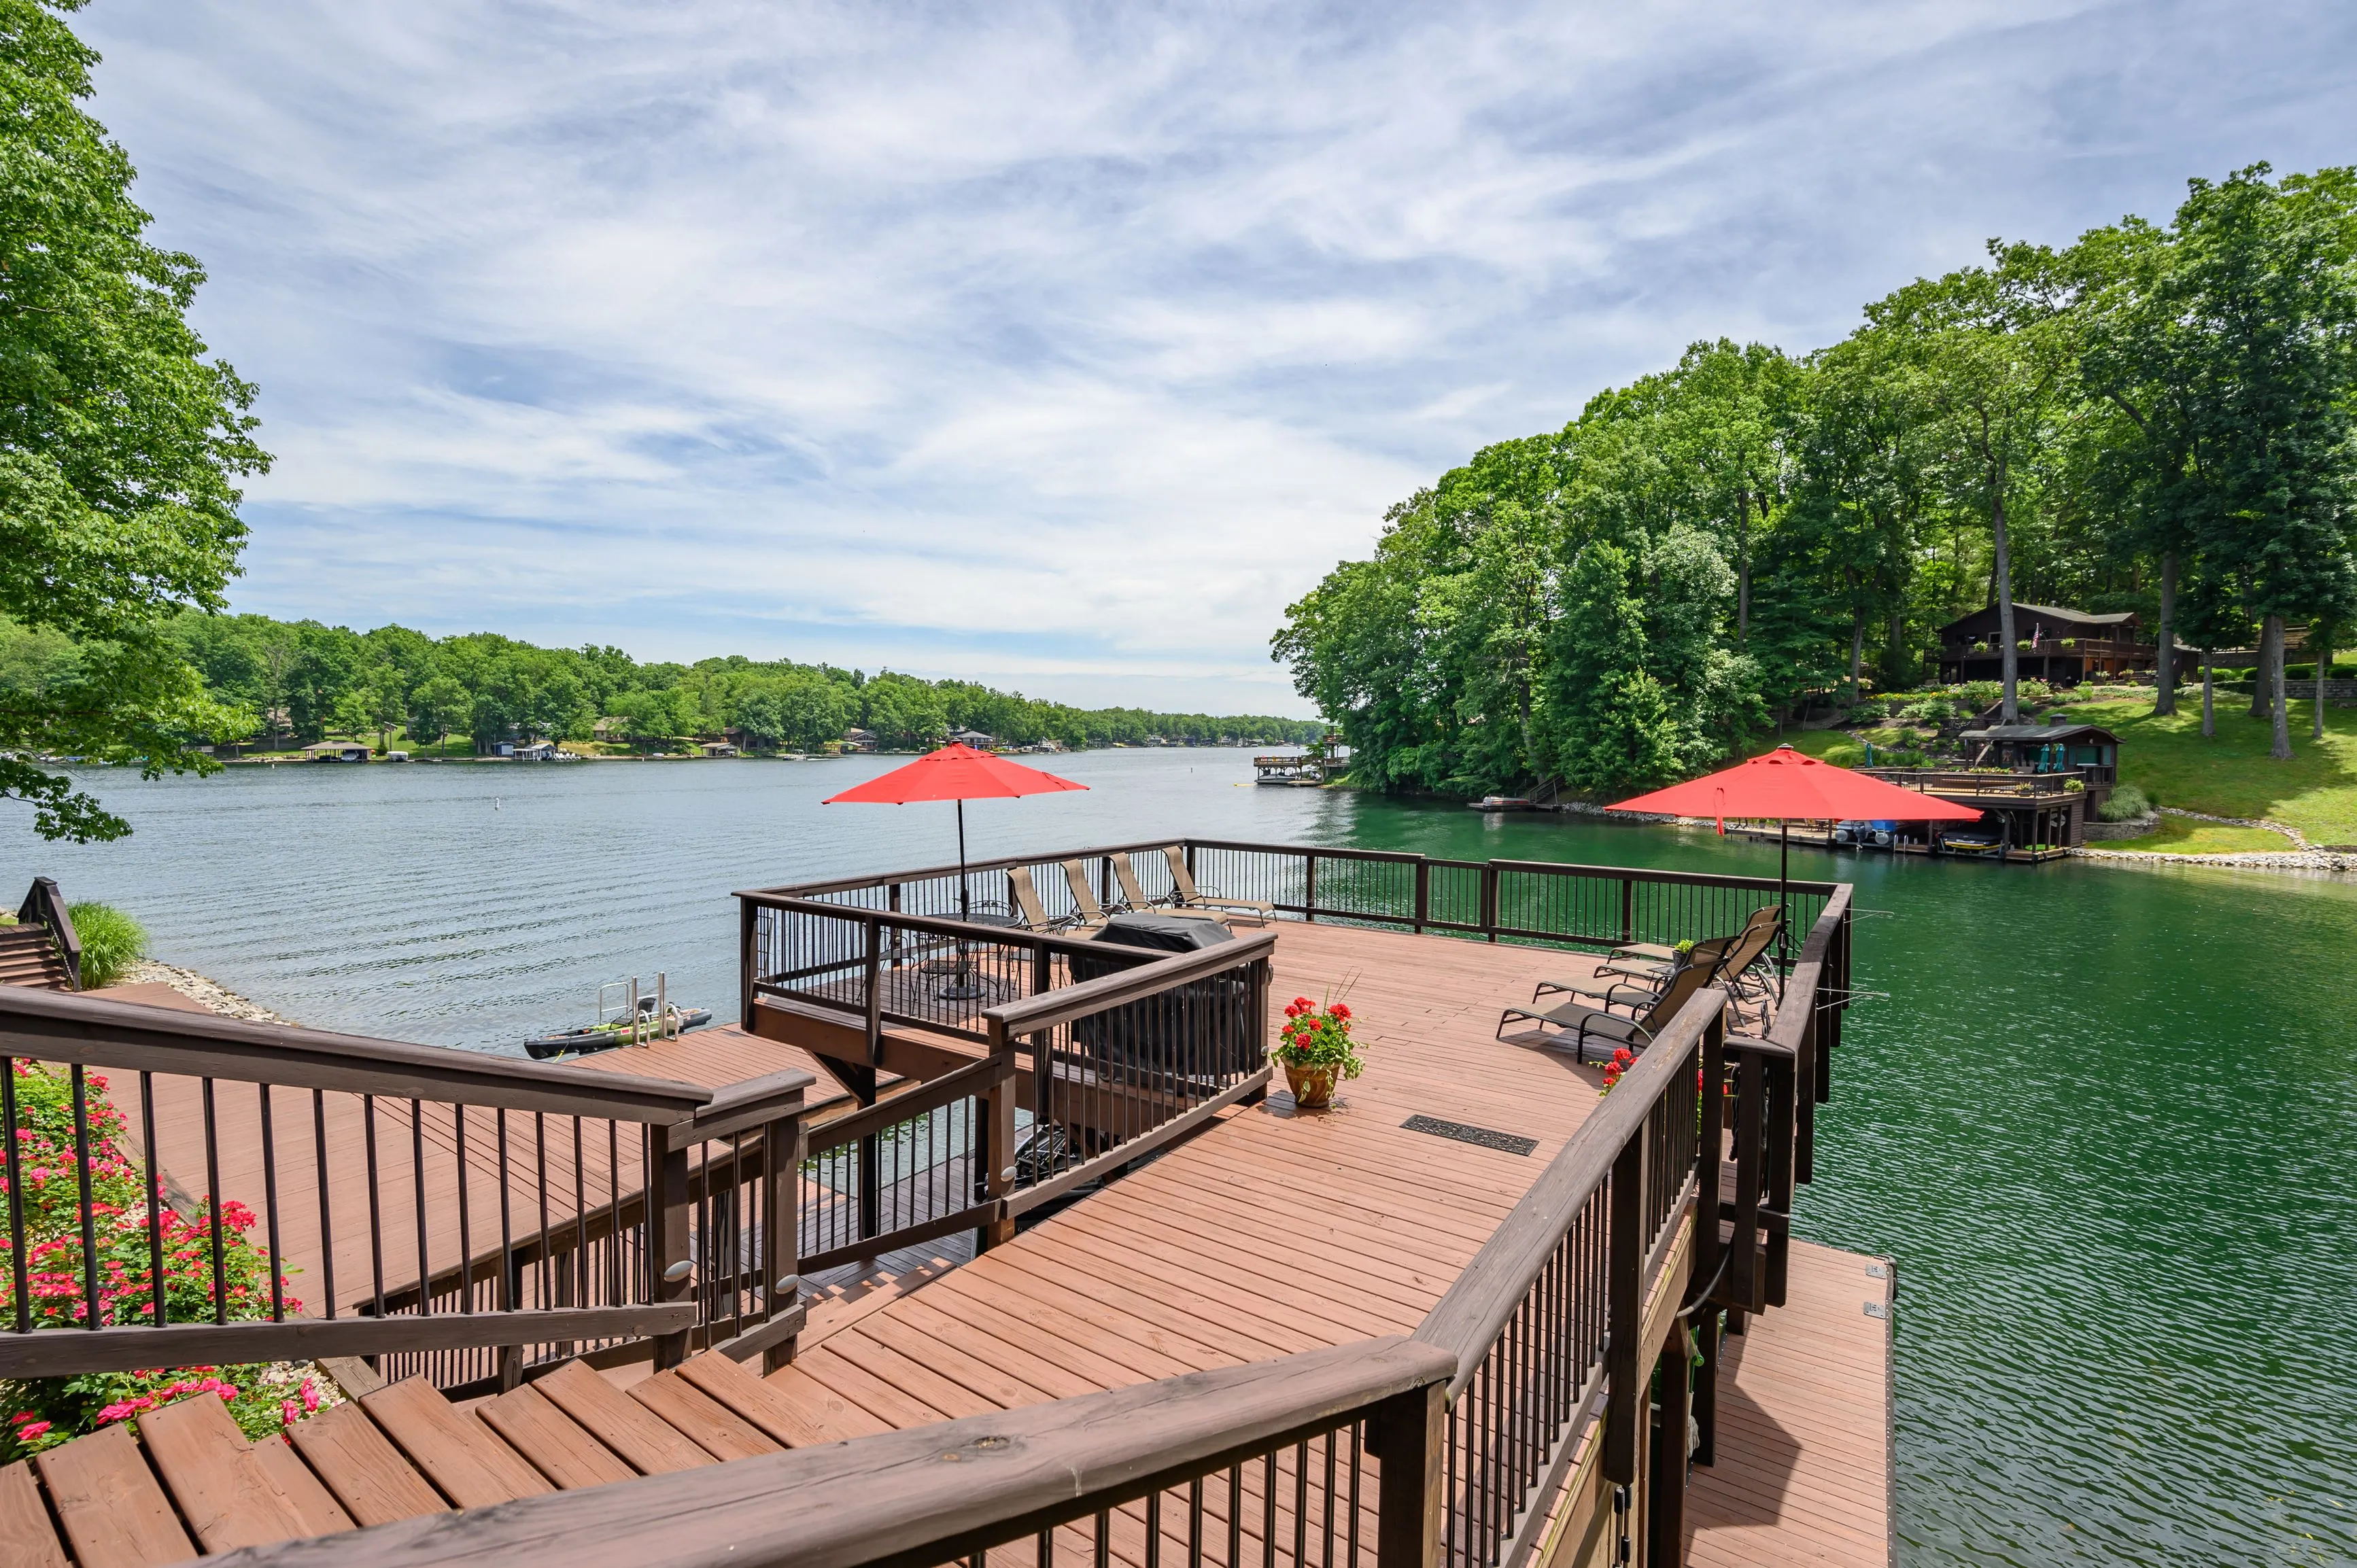 "Wooden deck with patio furniture overlooking a tranquil lake with red umbrellas and a lush green treeline under a clear sky"